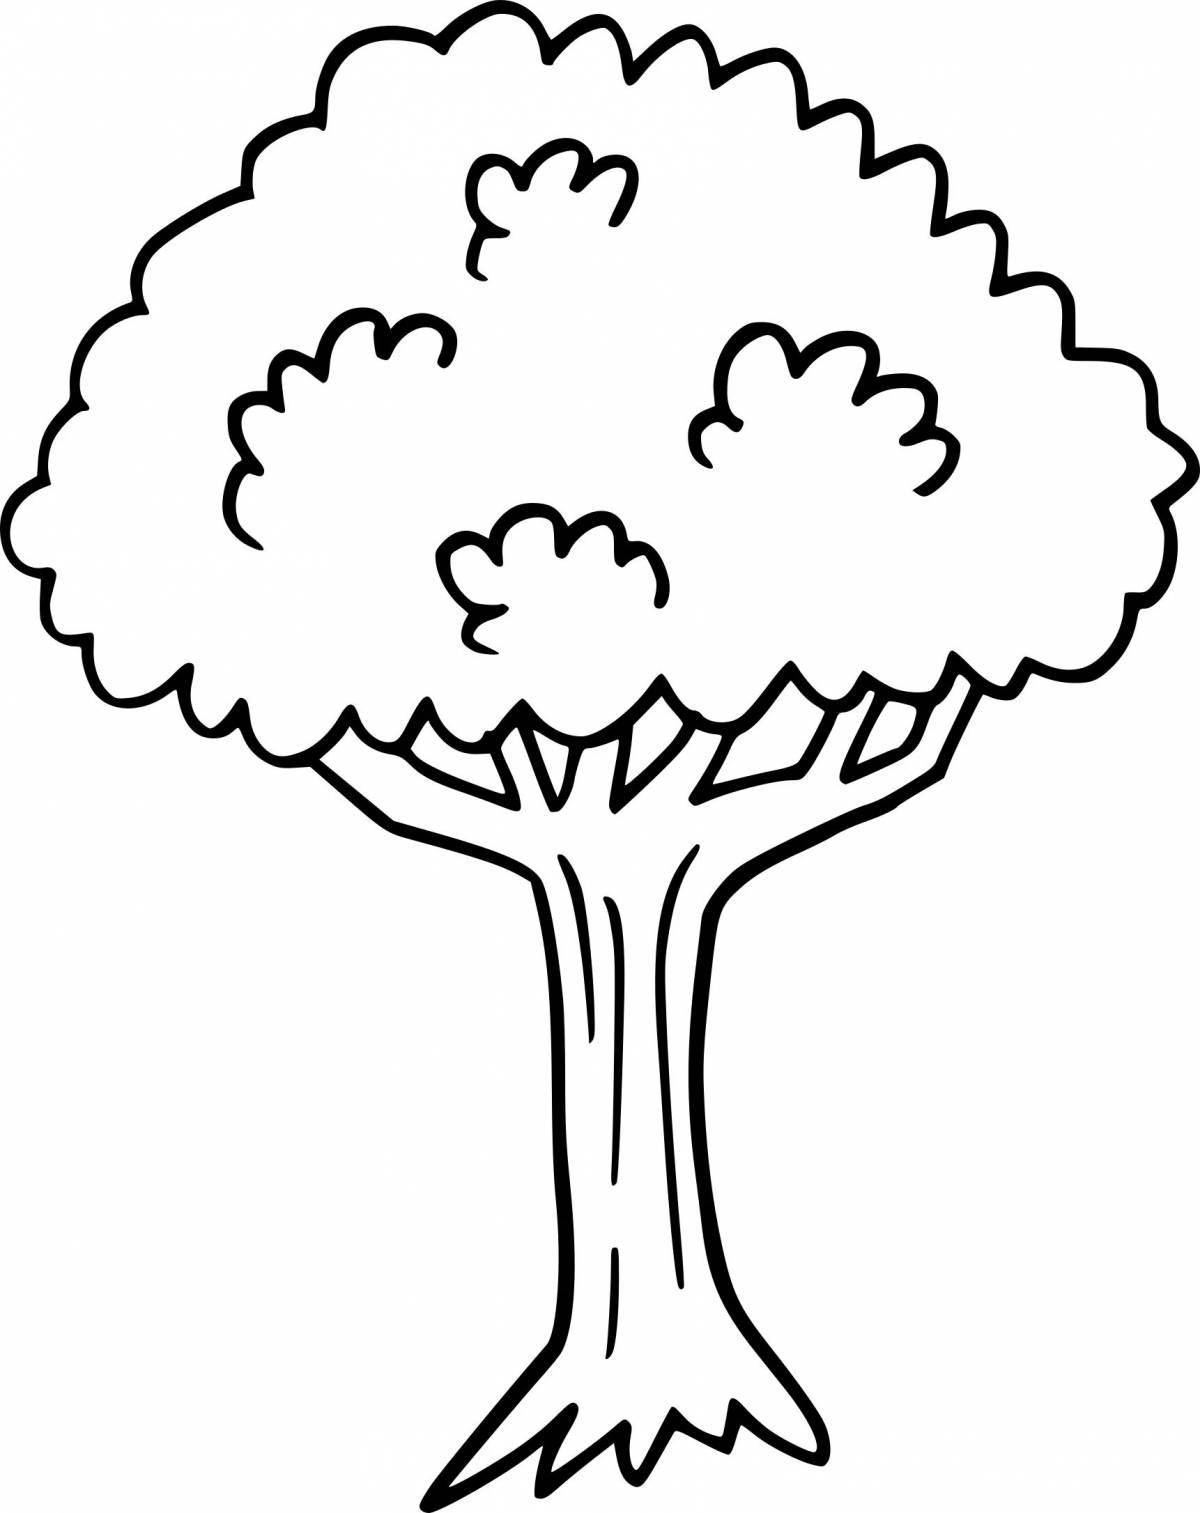 Colorful doodle tree coloring page for kids